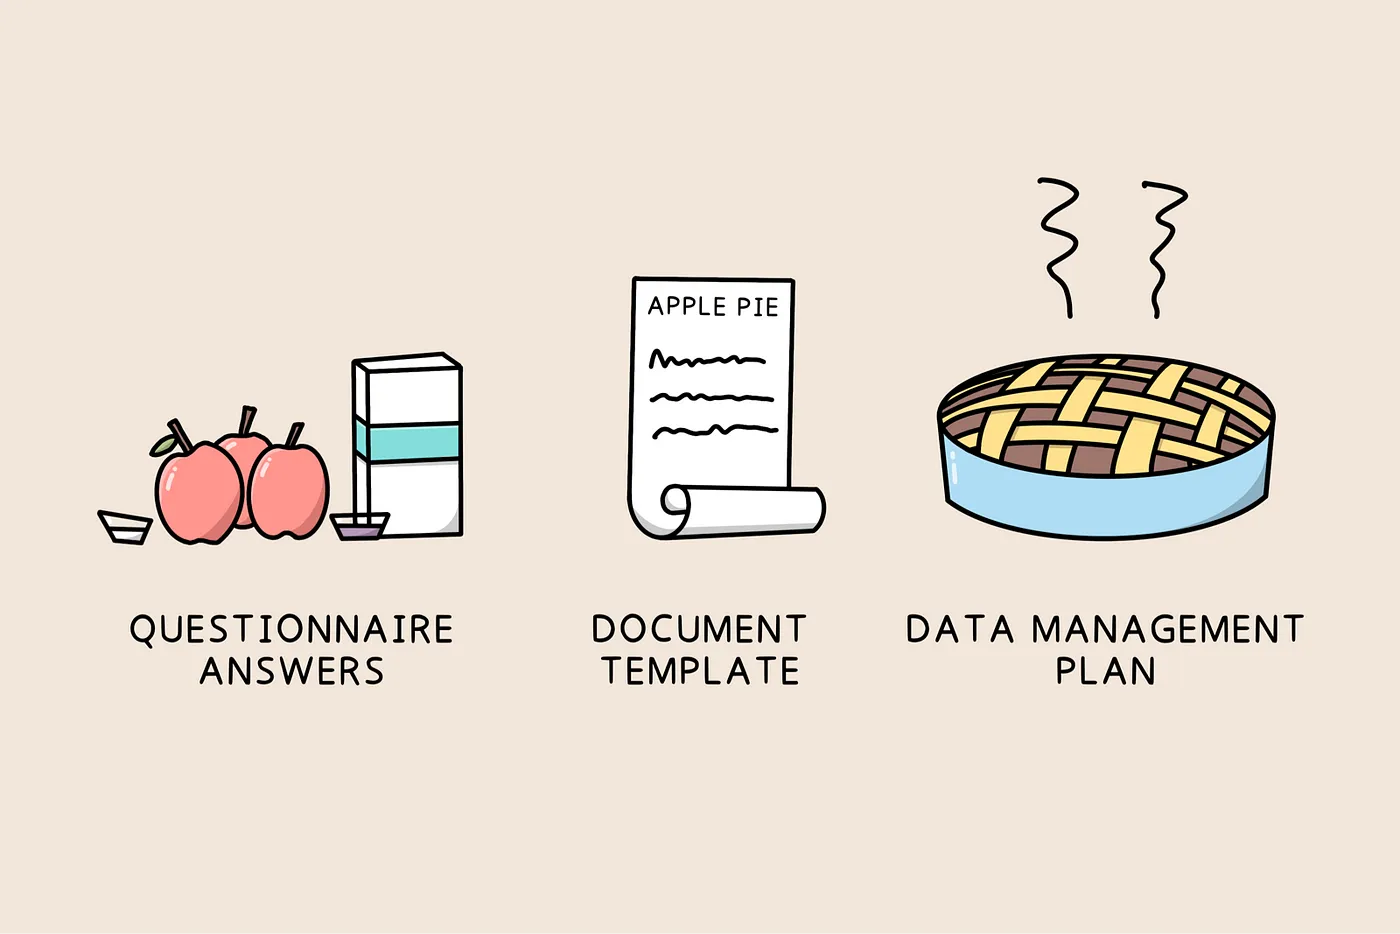 Document template is like a recipe for the data management plan